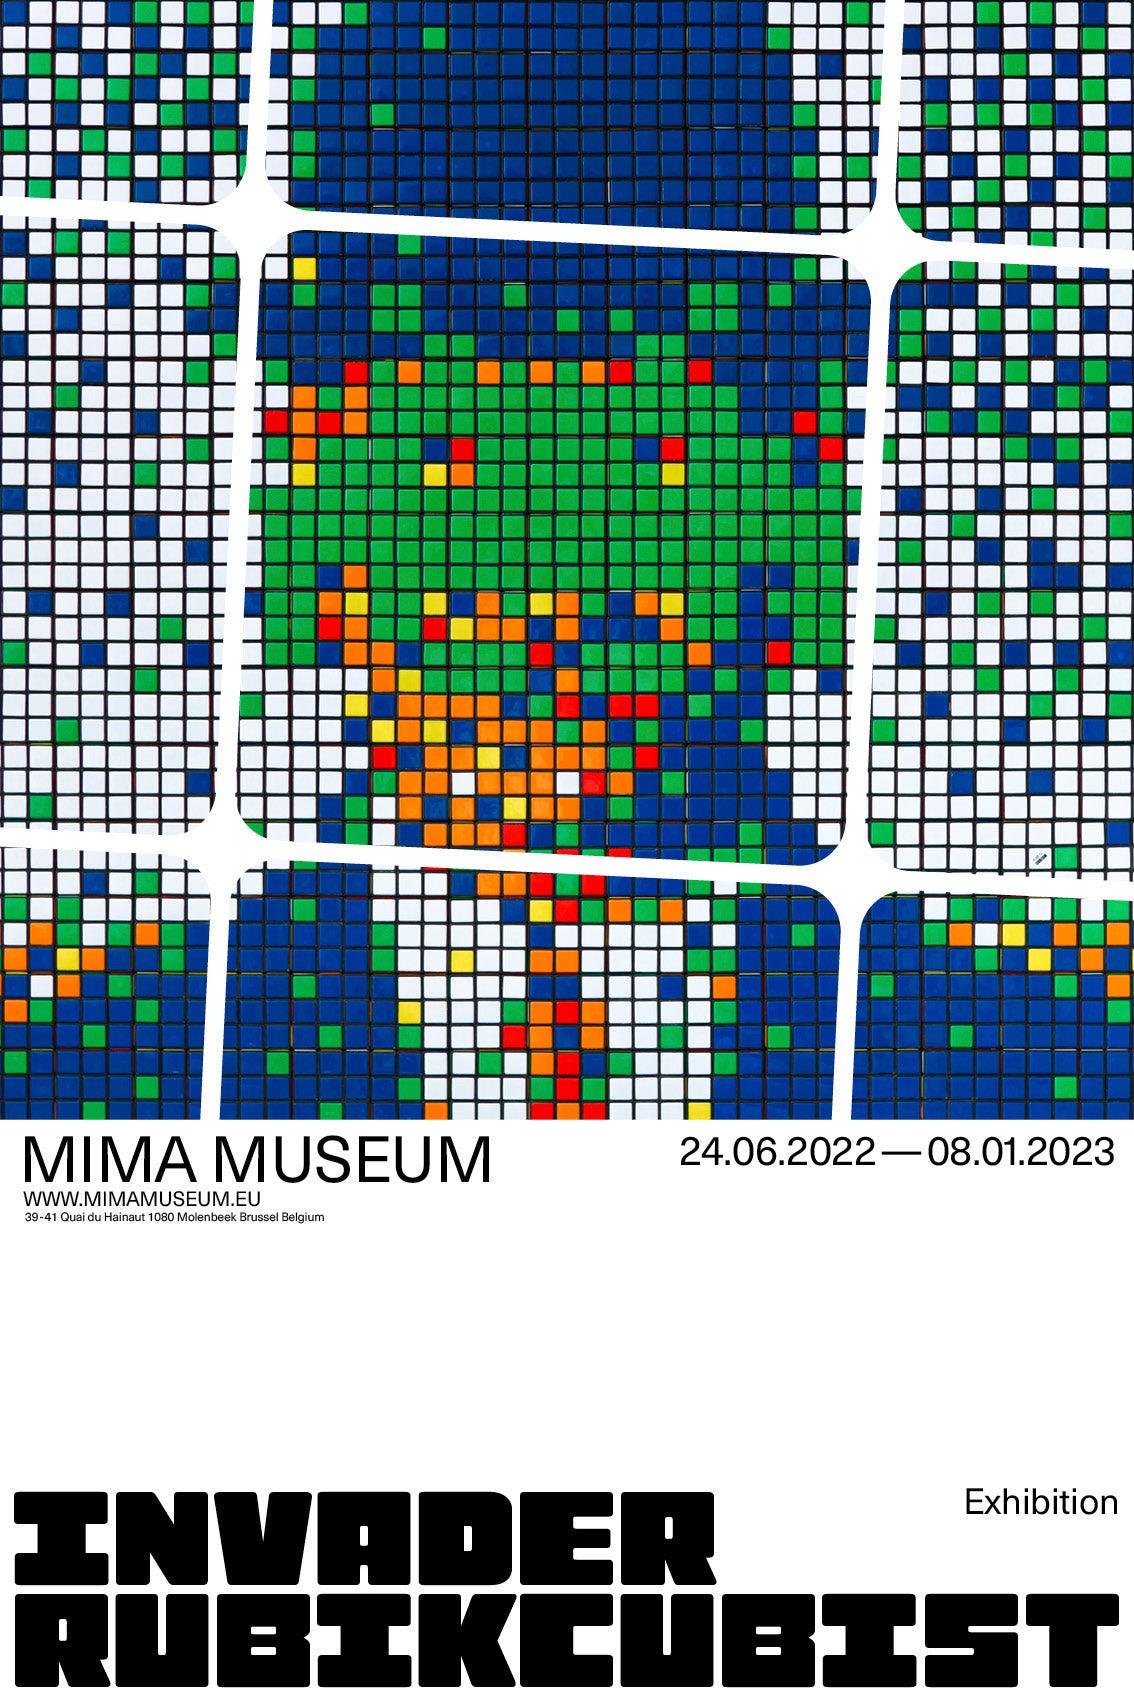 INVADER (FRENCH B.1969)
Rubikcubist Posters (Set of 10)
2022

the complete set of ten digital posters in colours on 130gsm Arctic Volume Silk wove
published by MIMA Museum, Brussels
each sheet 40 x 59.9cm
unframed